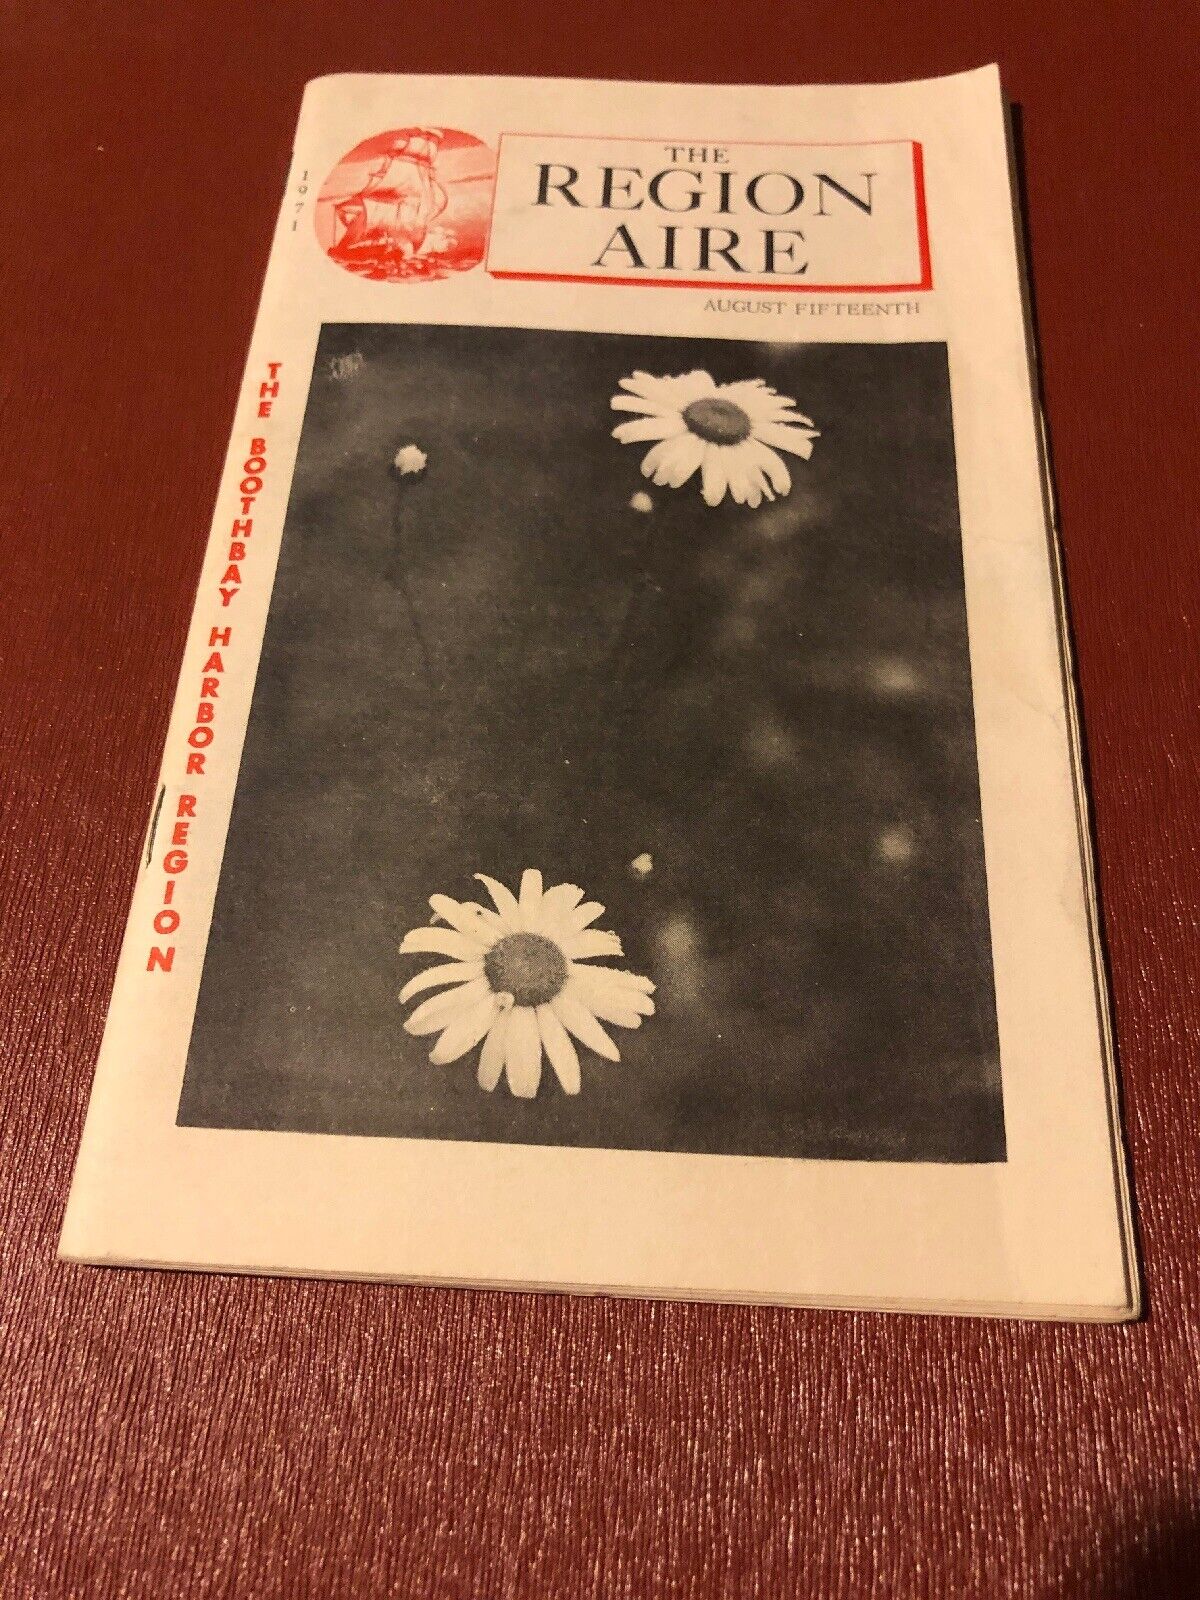 1971 Boothbay Maine The Region Aire Booklet